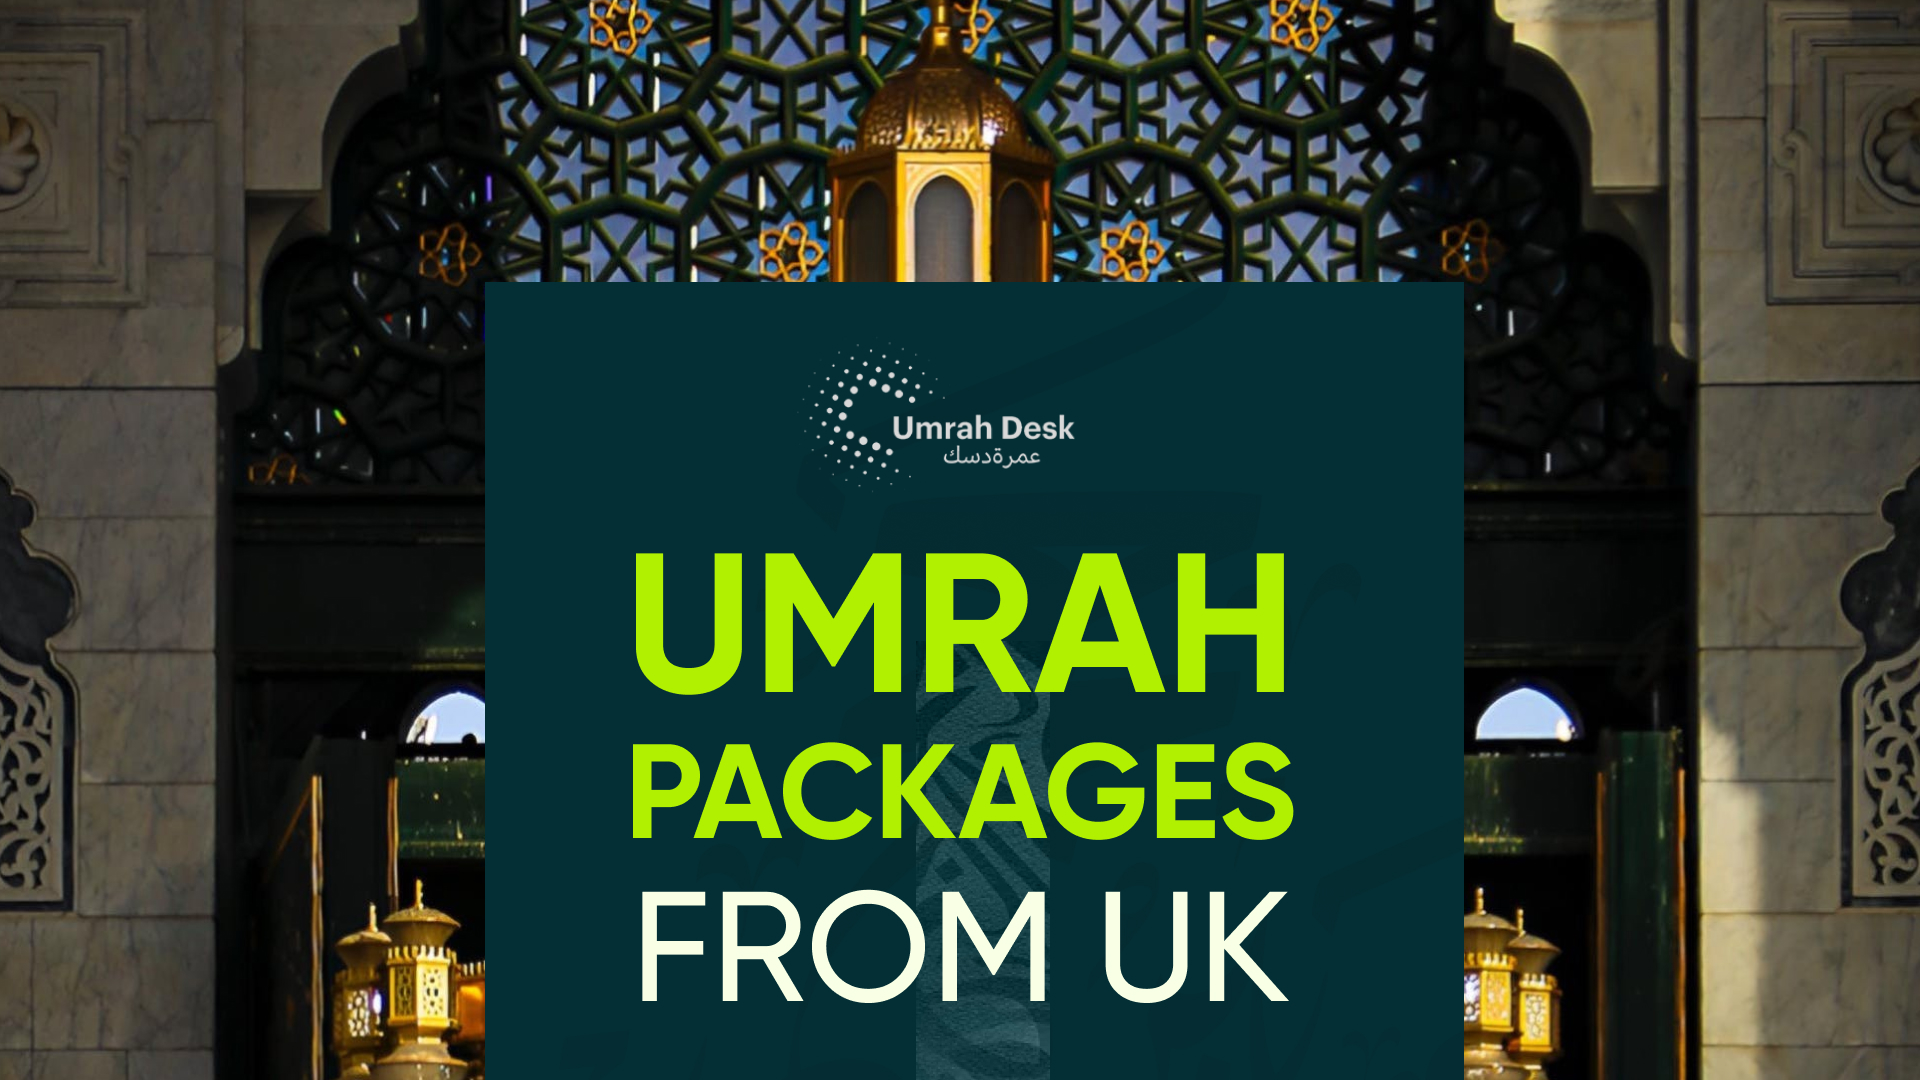 Umrah Packages from uk